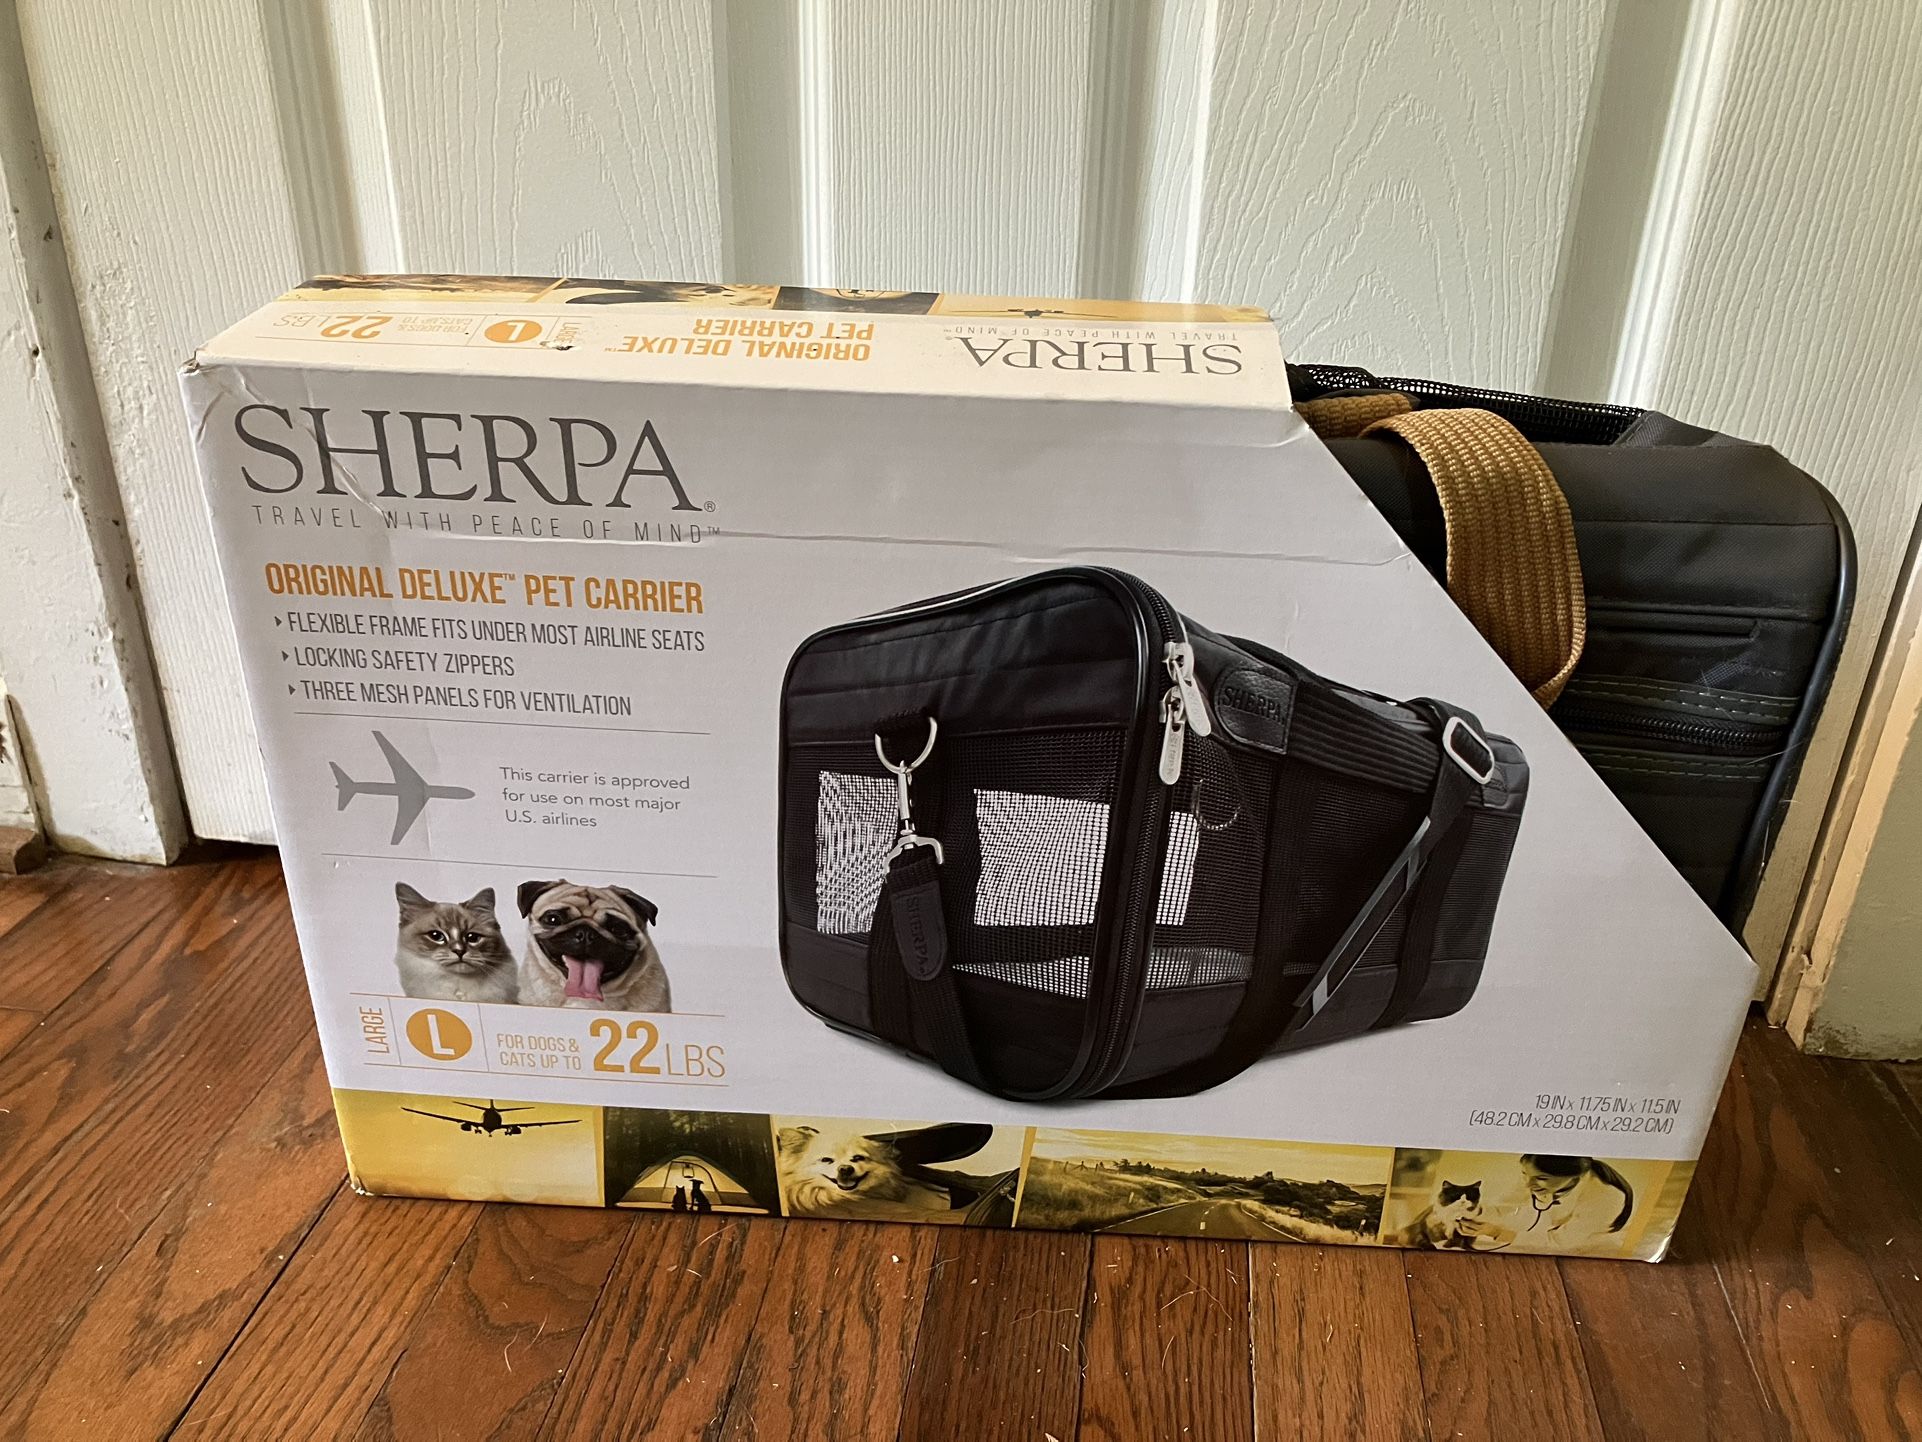 SHERPA Original Deluxe Pet Carrier (Large) (Unopened In Box) ($40 OBO)